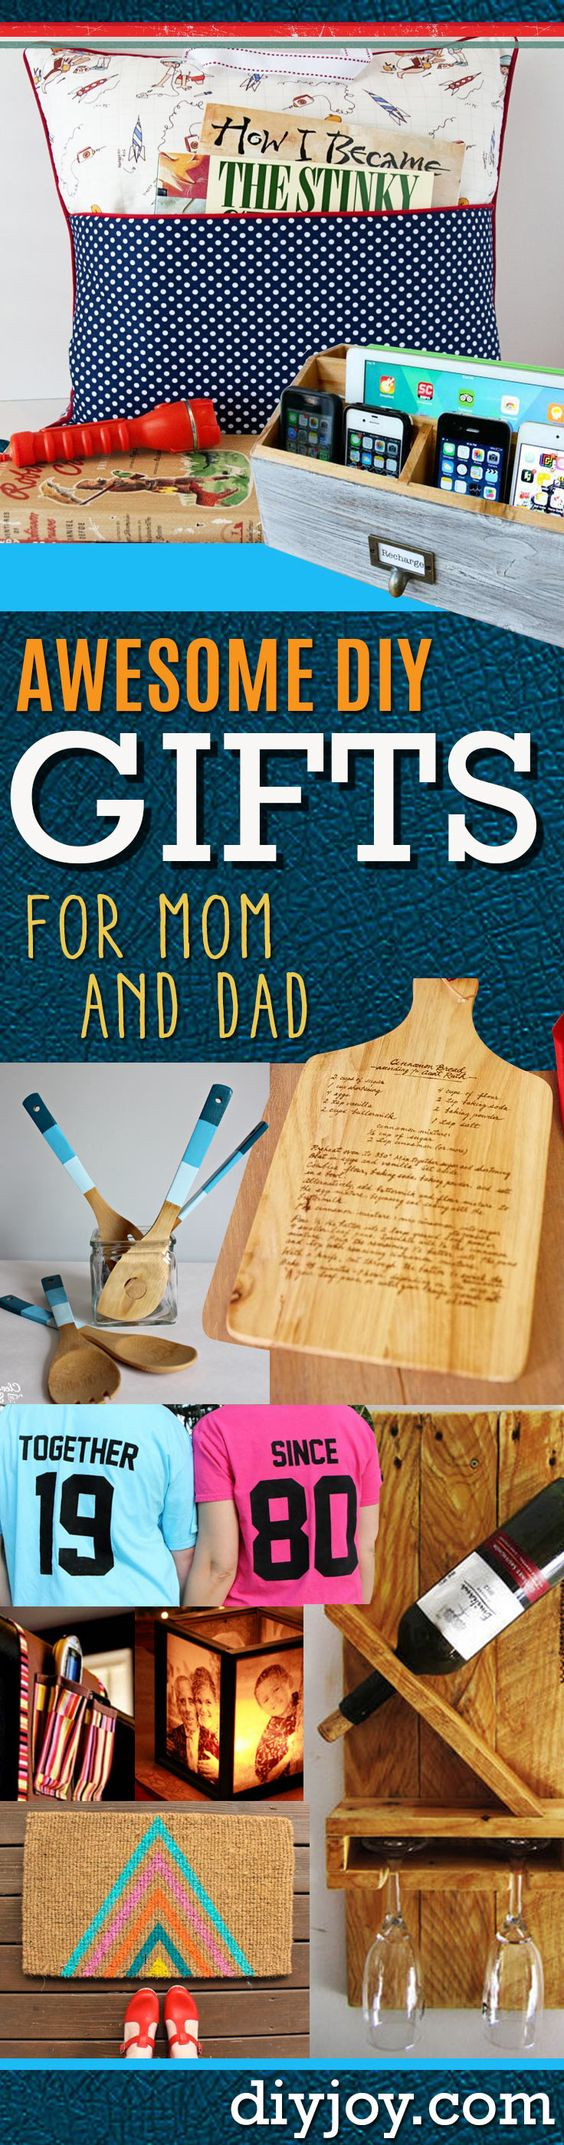 DIY Christmas Gift For Parents
 Awesome DIY Gift Ideas Mom and Dad Will Love